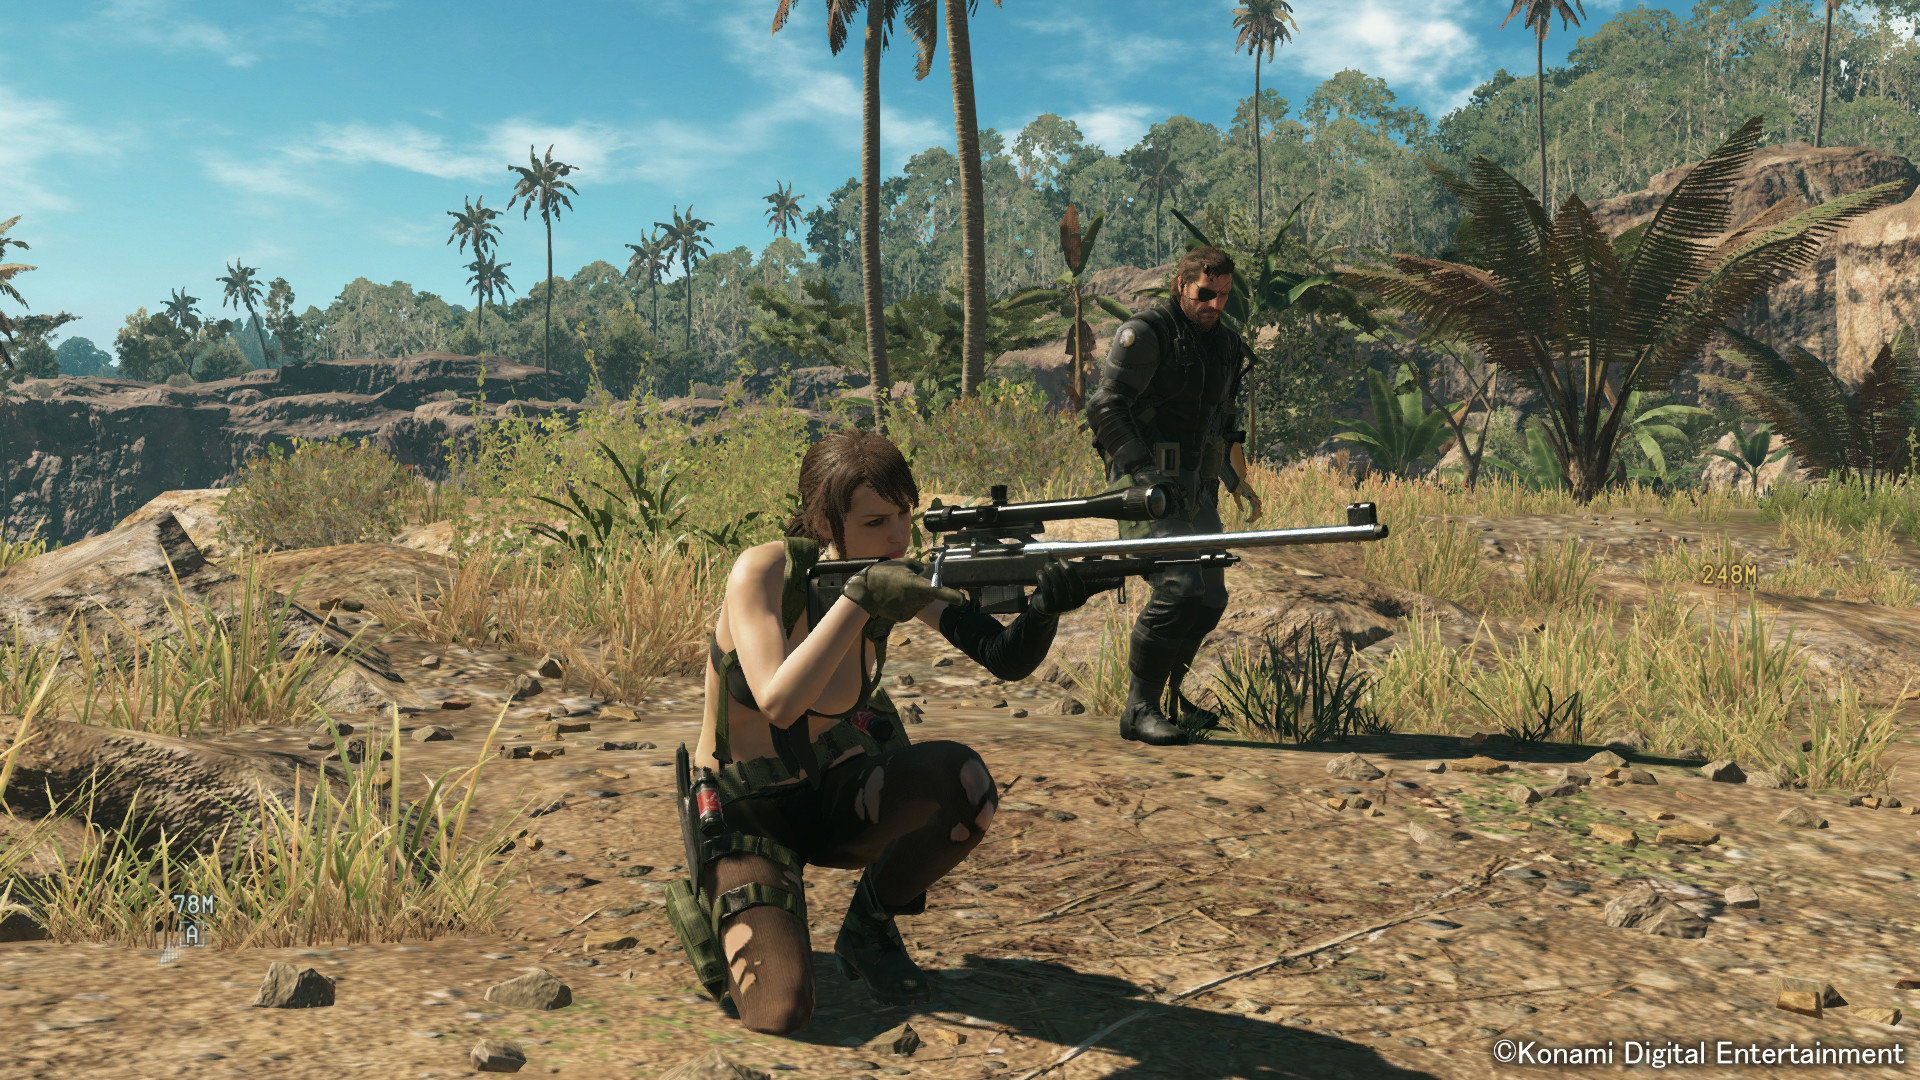 1920x1080 You Can Now Play as Quiet in Metal Gear Solid 5